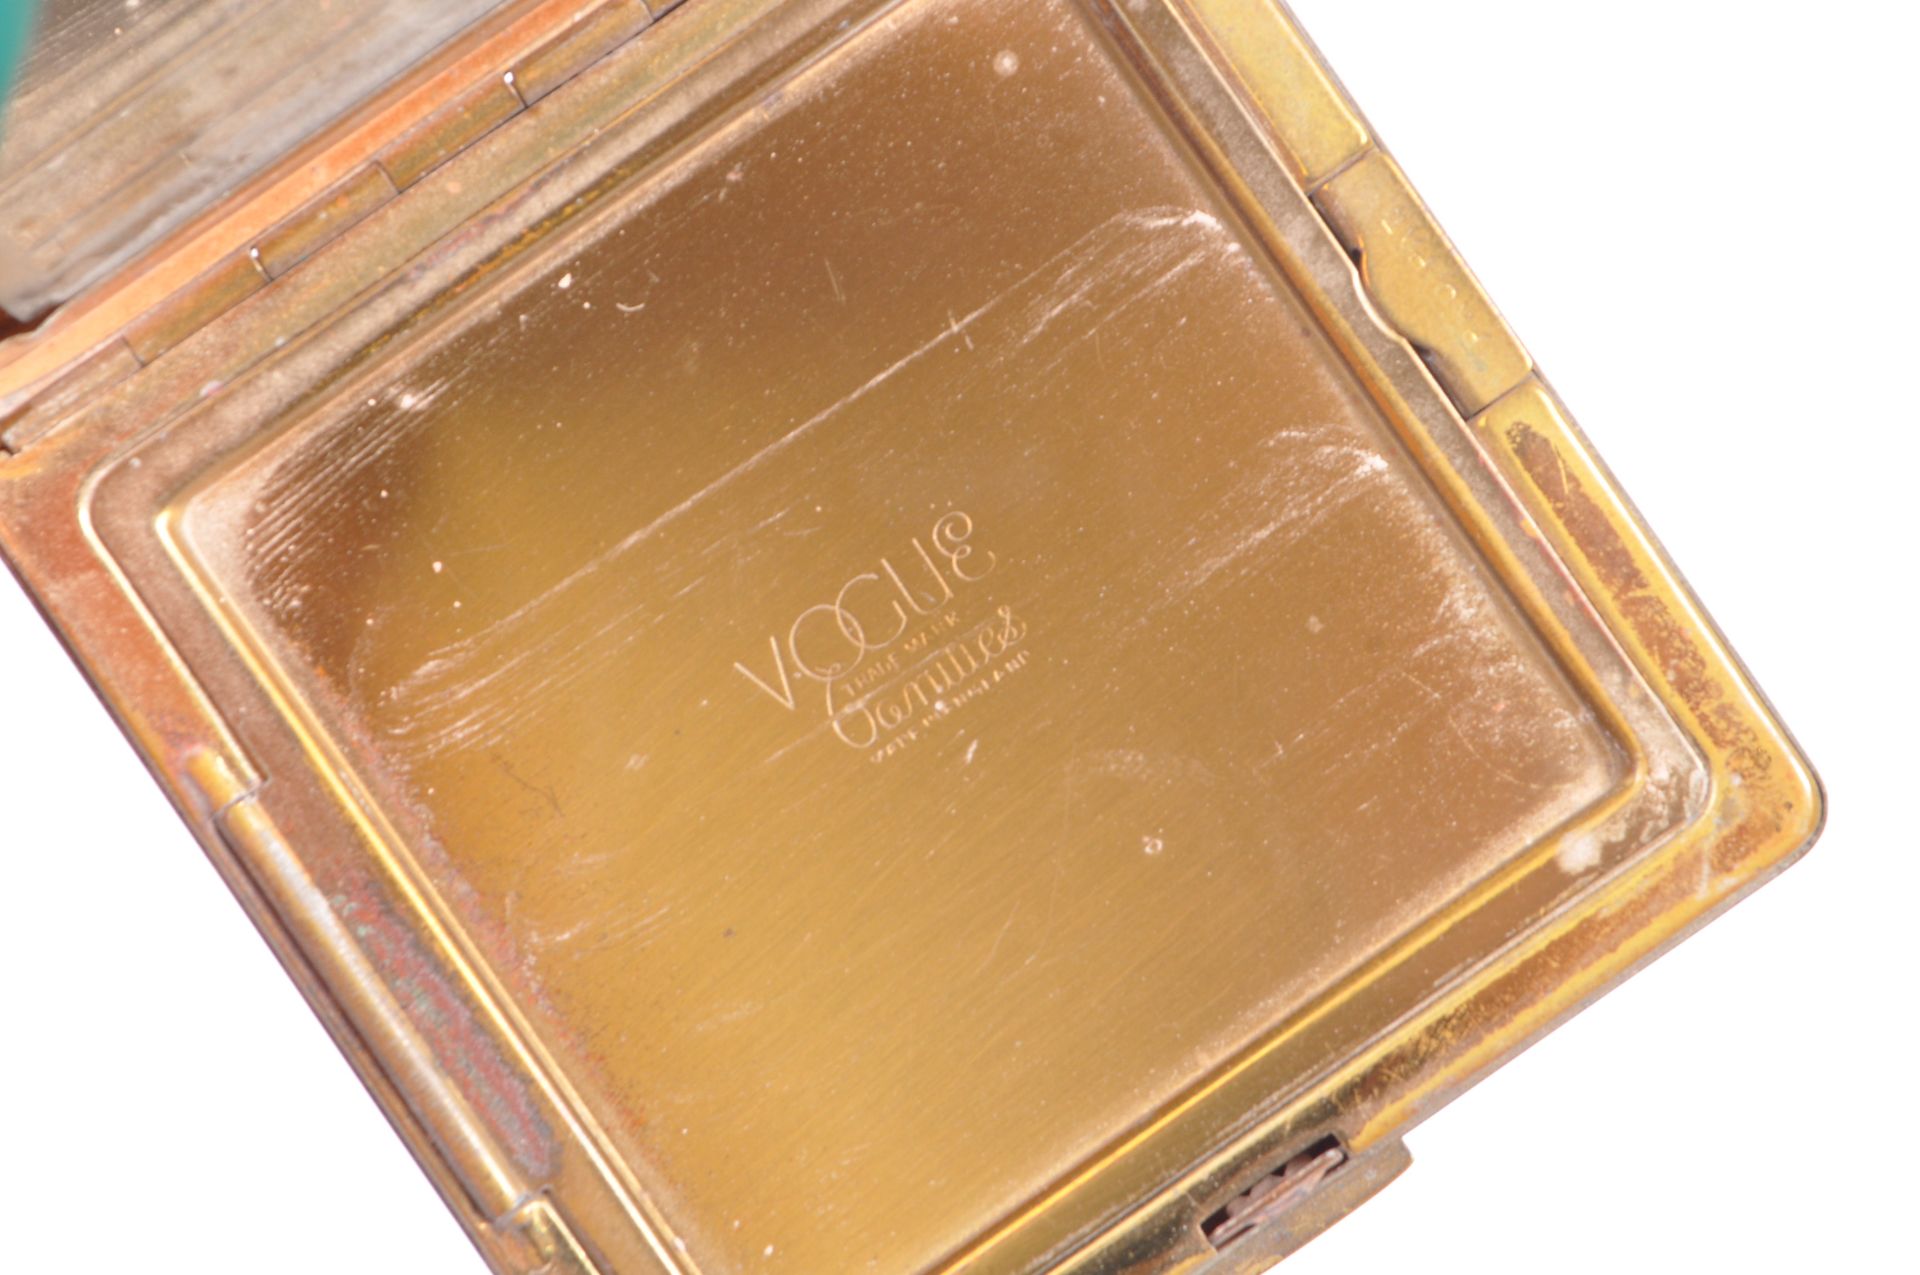 COLLECTION OF 20TH CENTURY VINTAGE VANITY COMPACTS - Image 10 of 10